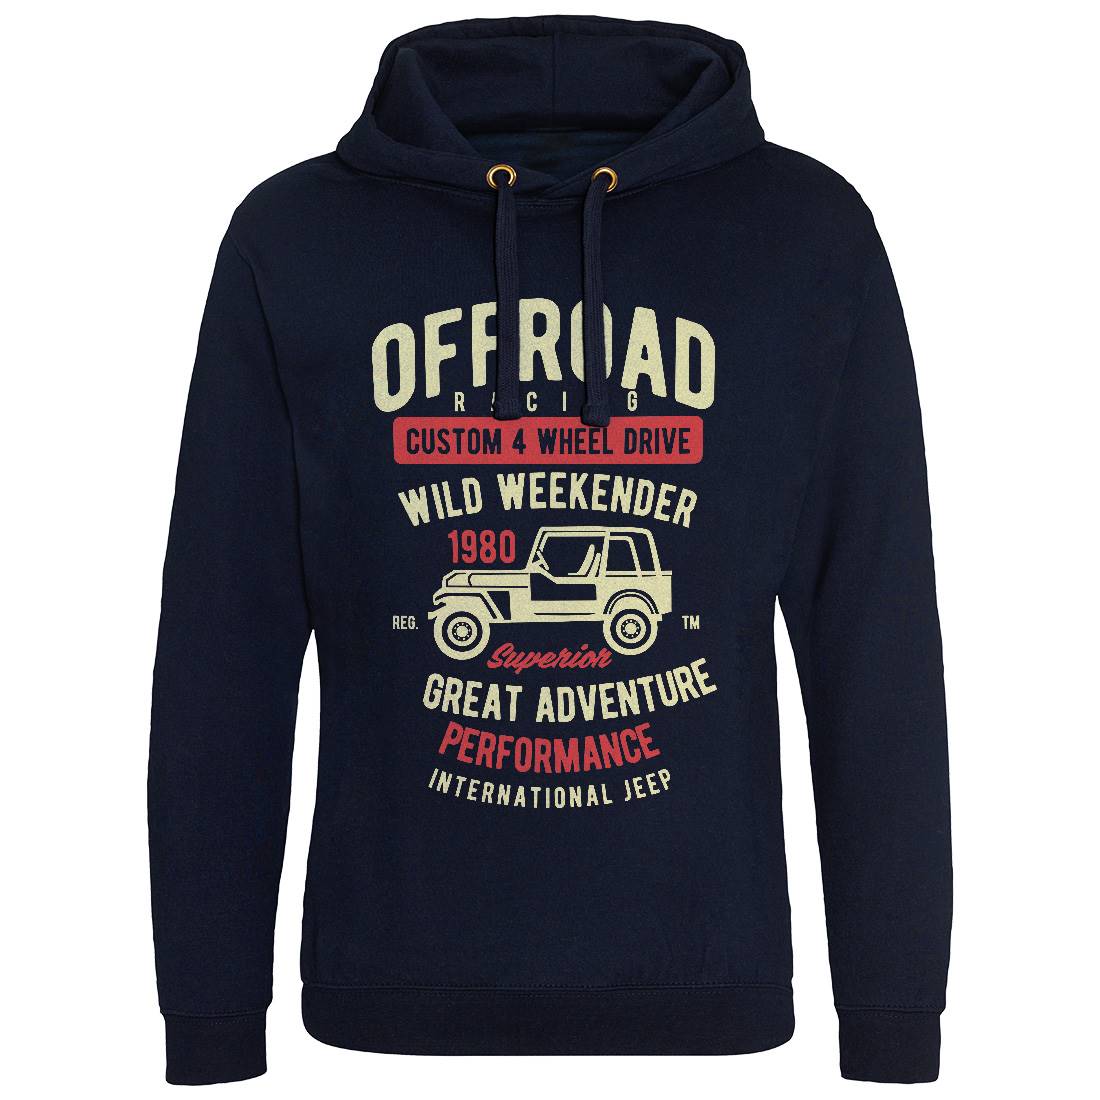 Off Road Racing Mens Hoodie Without Pocket Cars B433